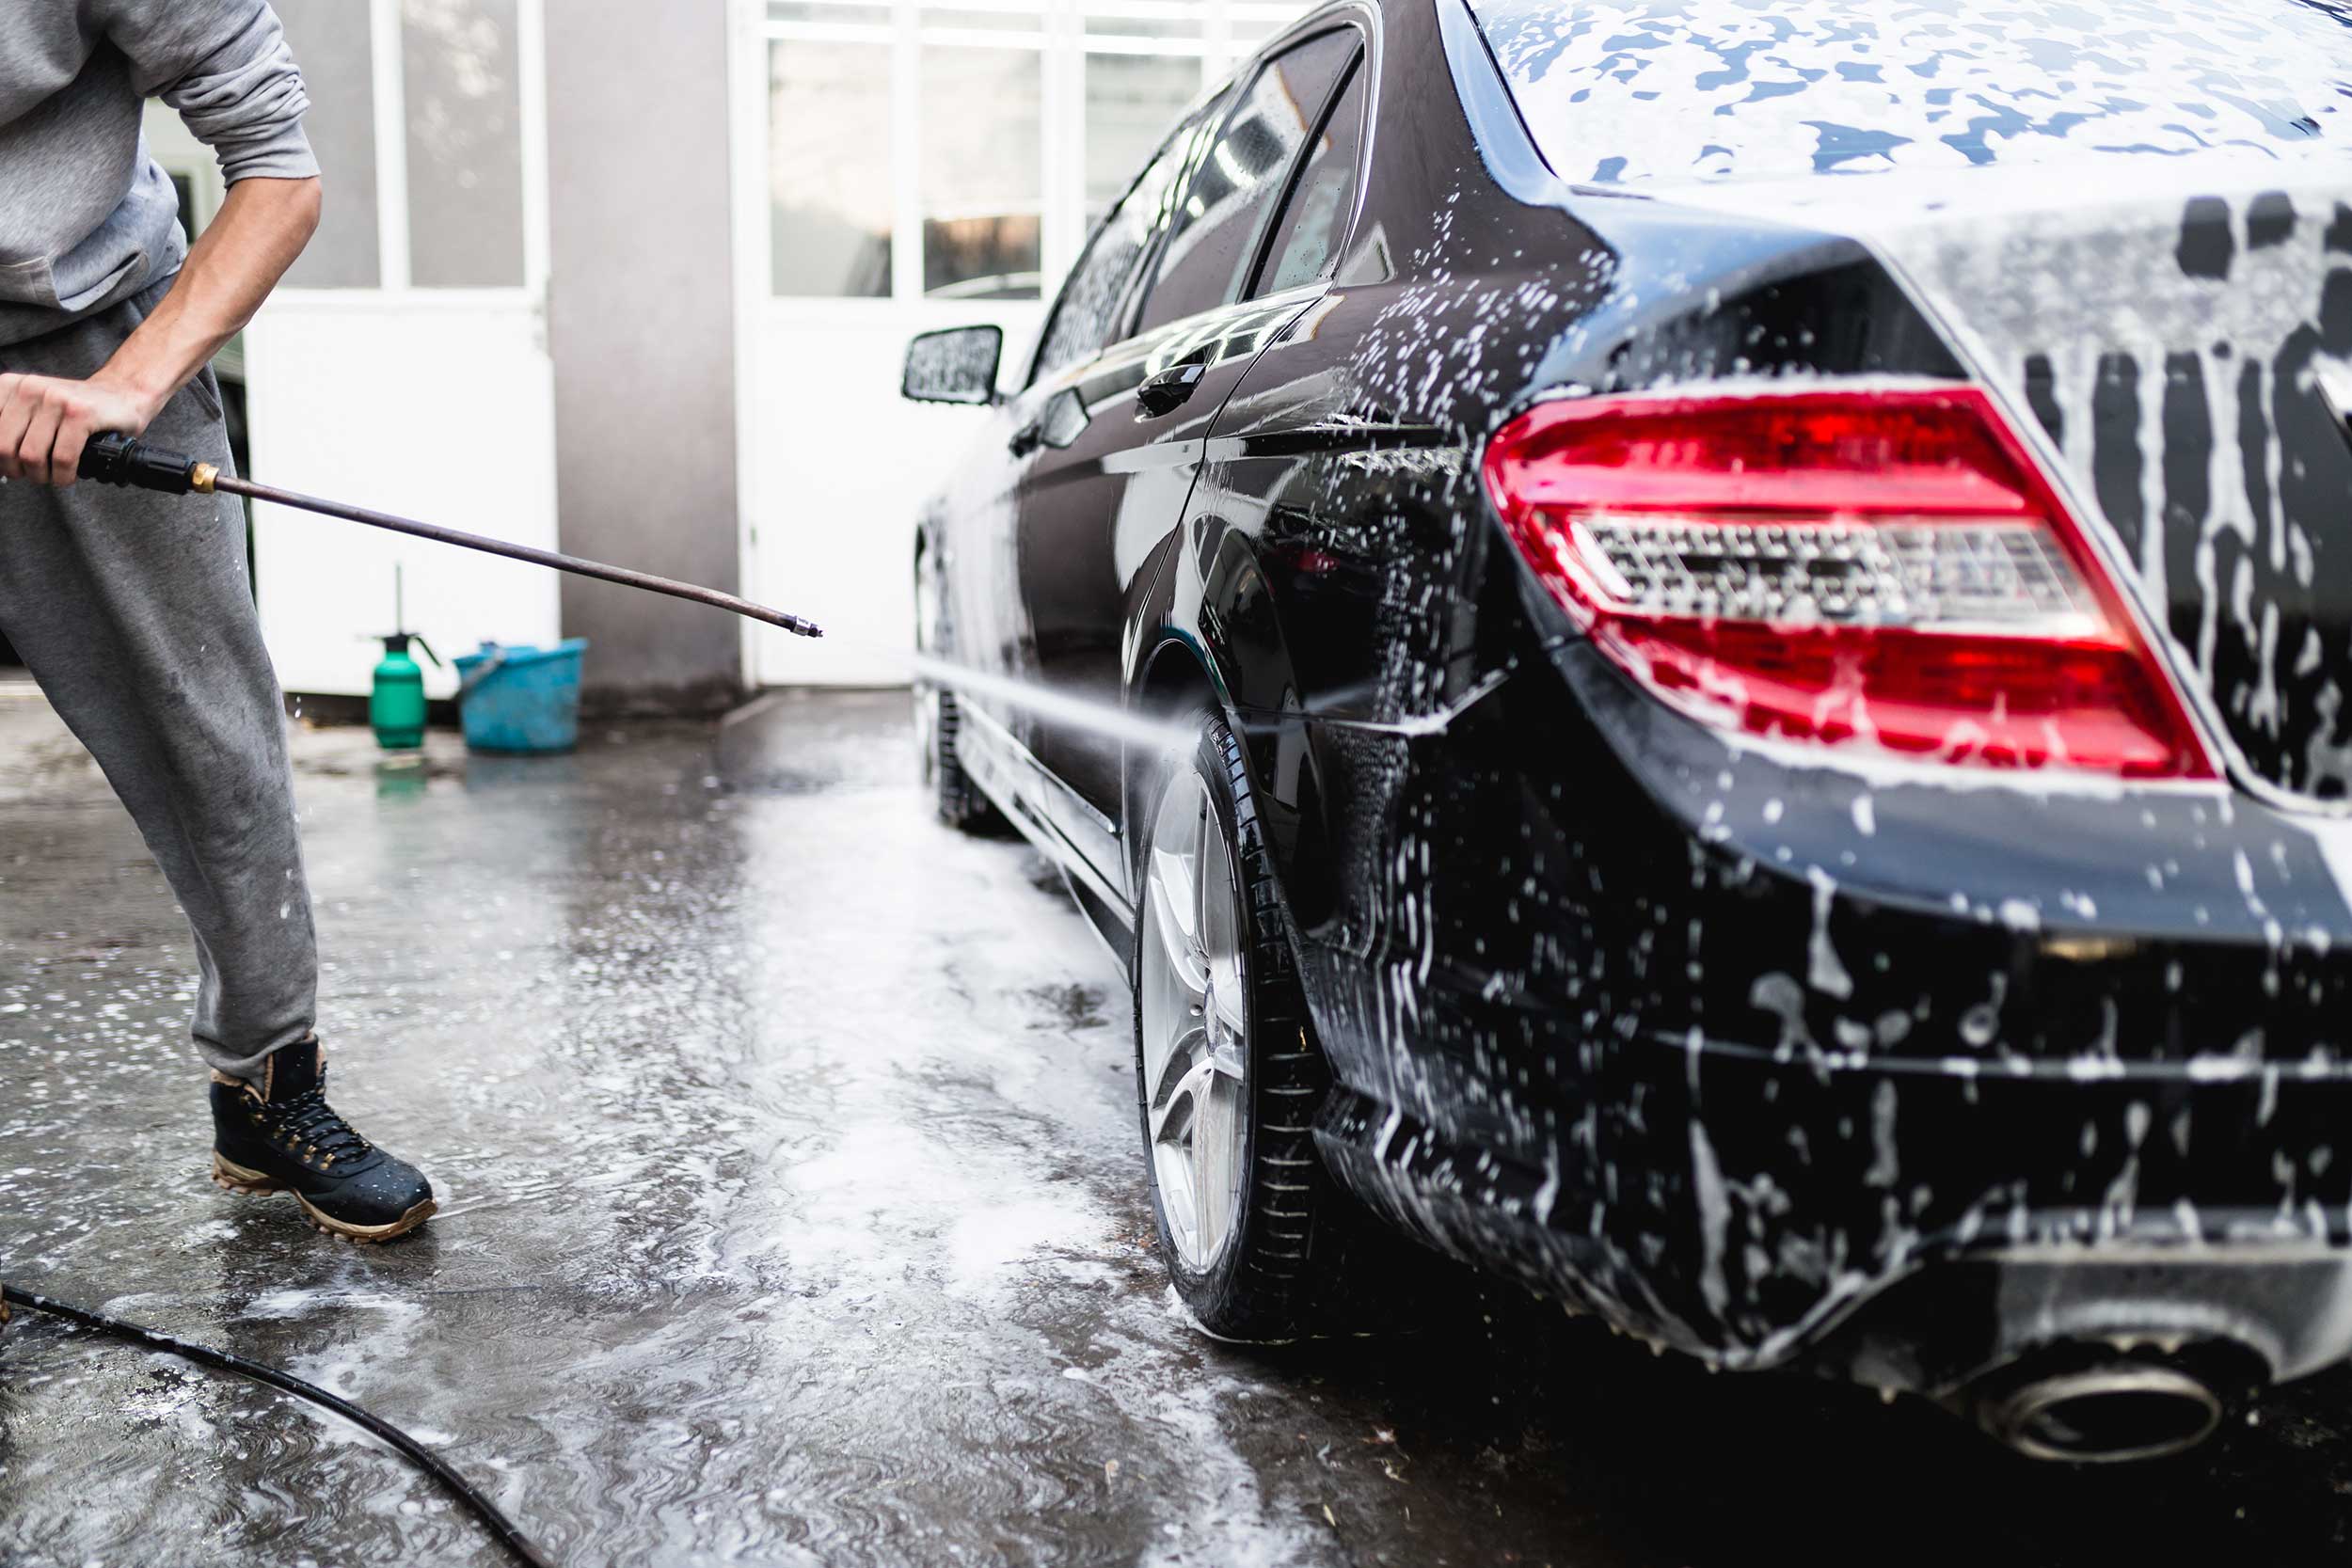 Electric Car Wash - Can an electric car be washed with water, just like treating a normal car?